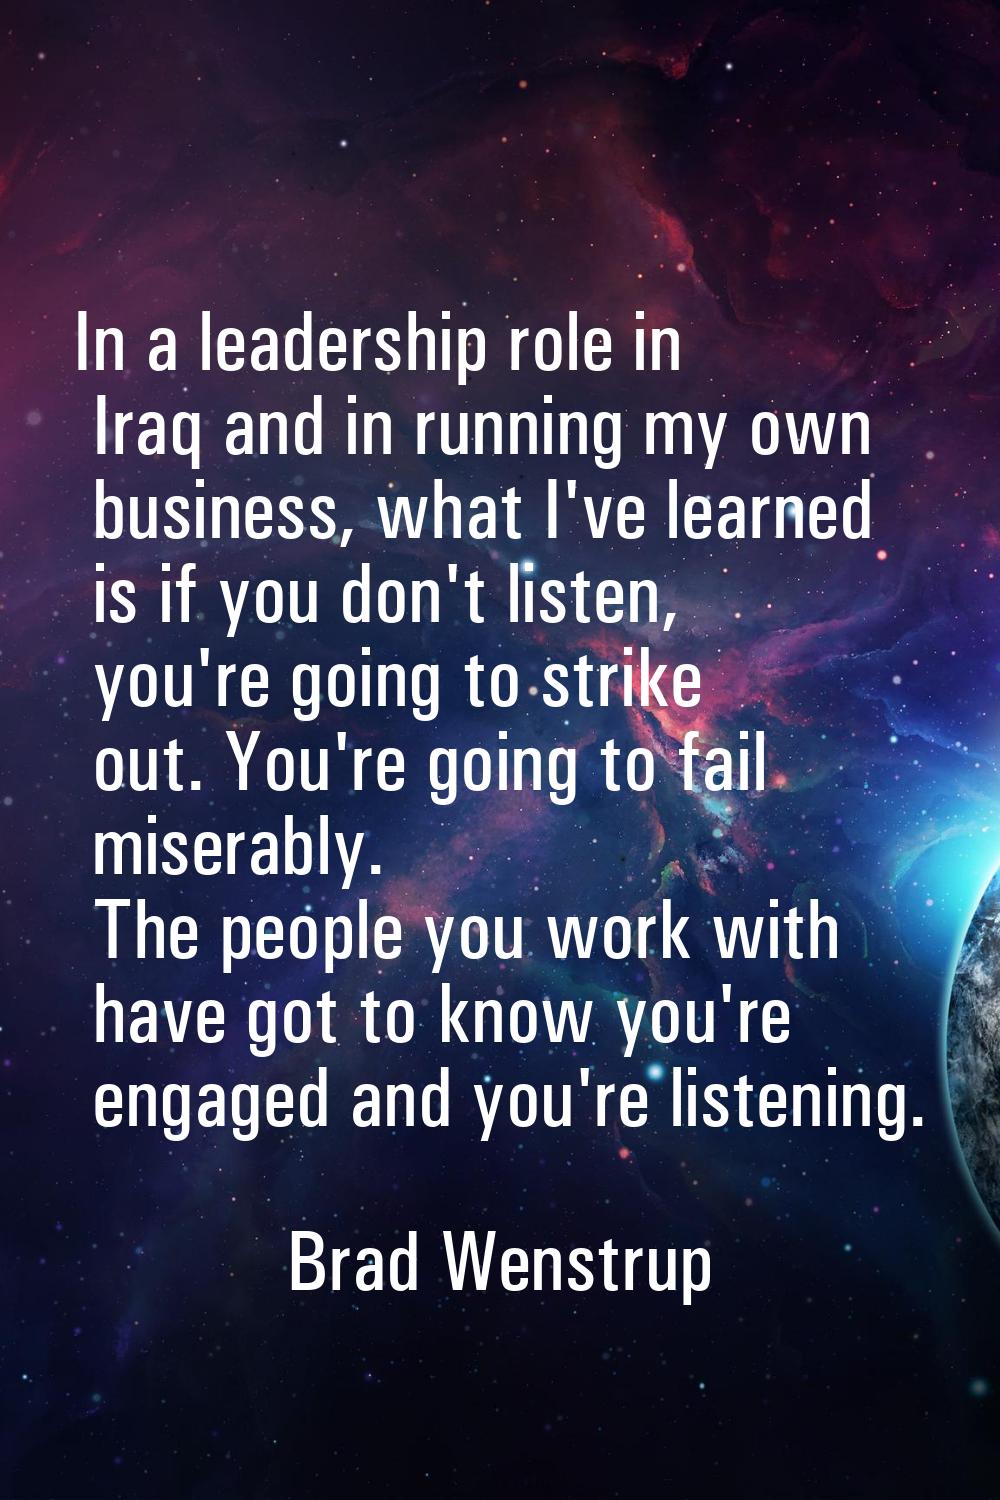 In a leadership role in Iraq and in running my own business, what I've learned is if you don't list